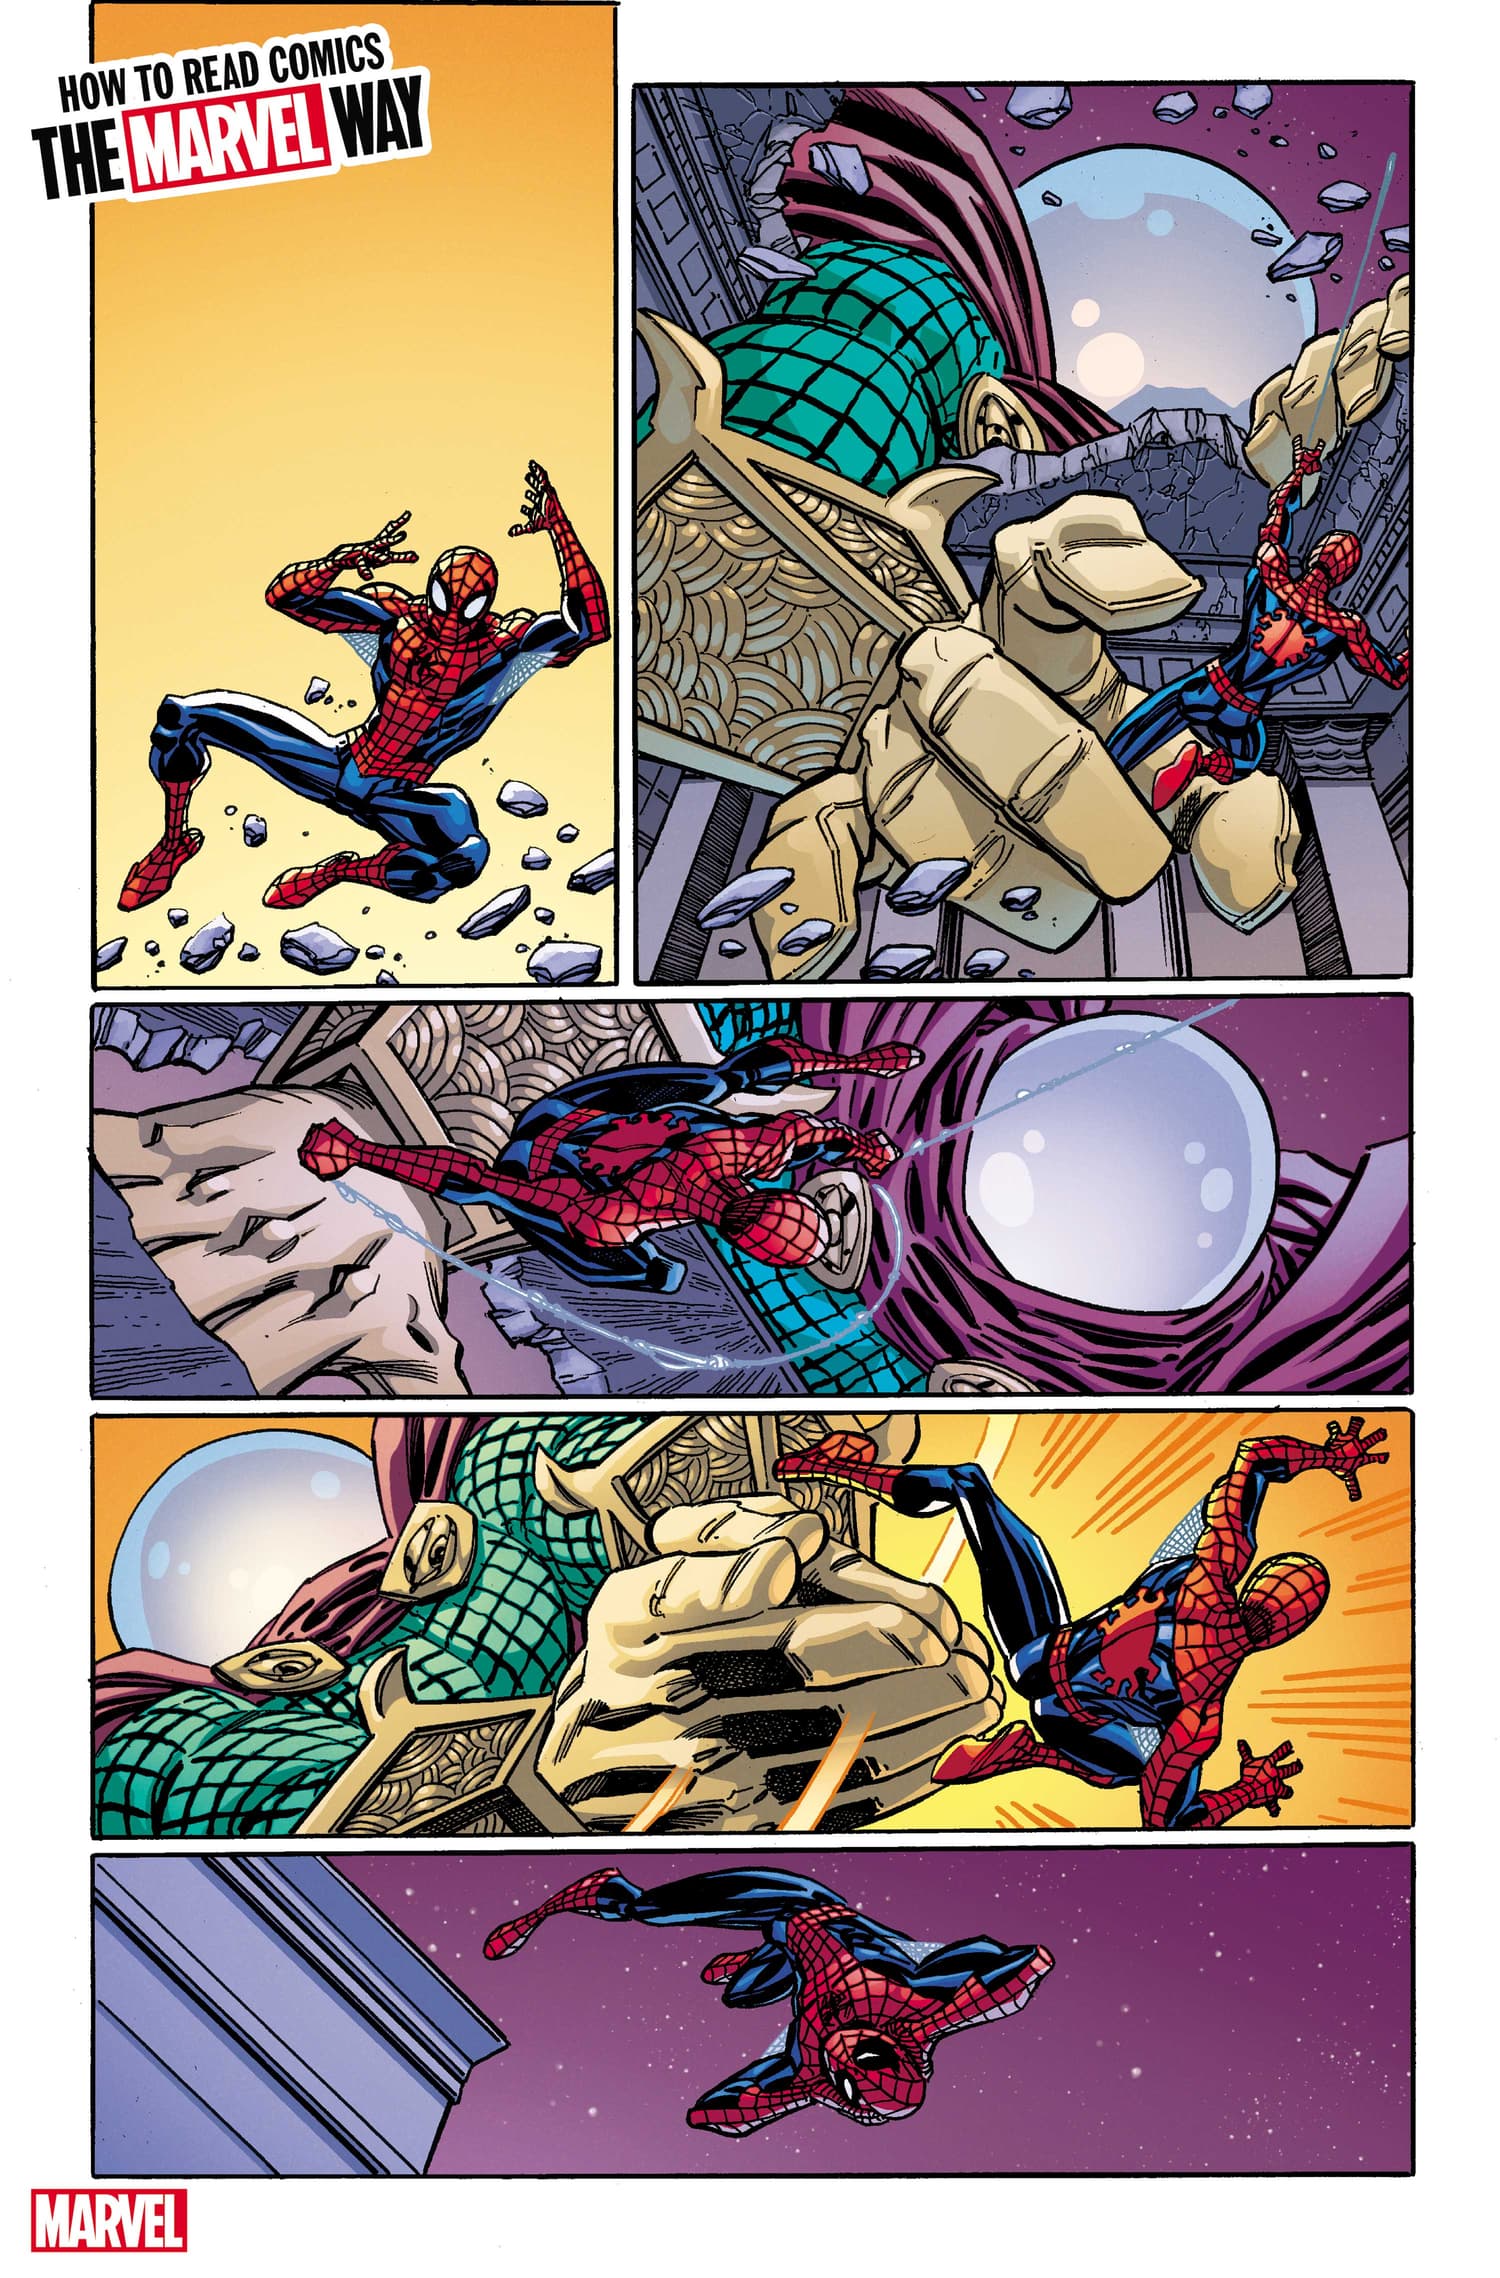 HOW TO READ COMICS THE MARVEL WAY #1 interiors by Scott Koblish with colors by Nolan Woodard